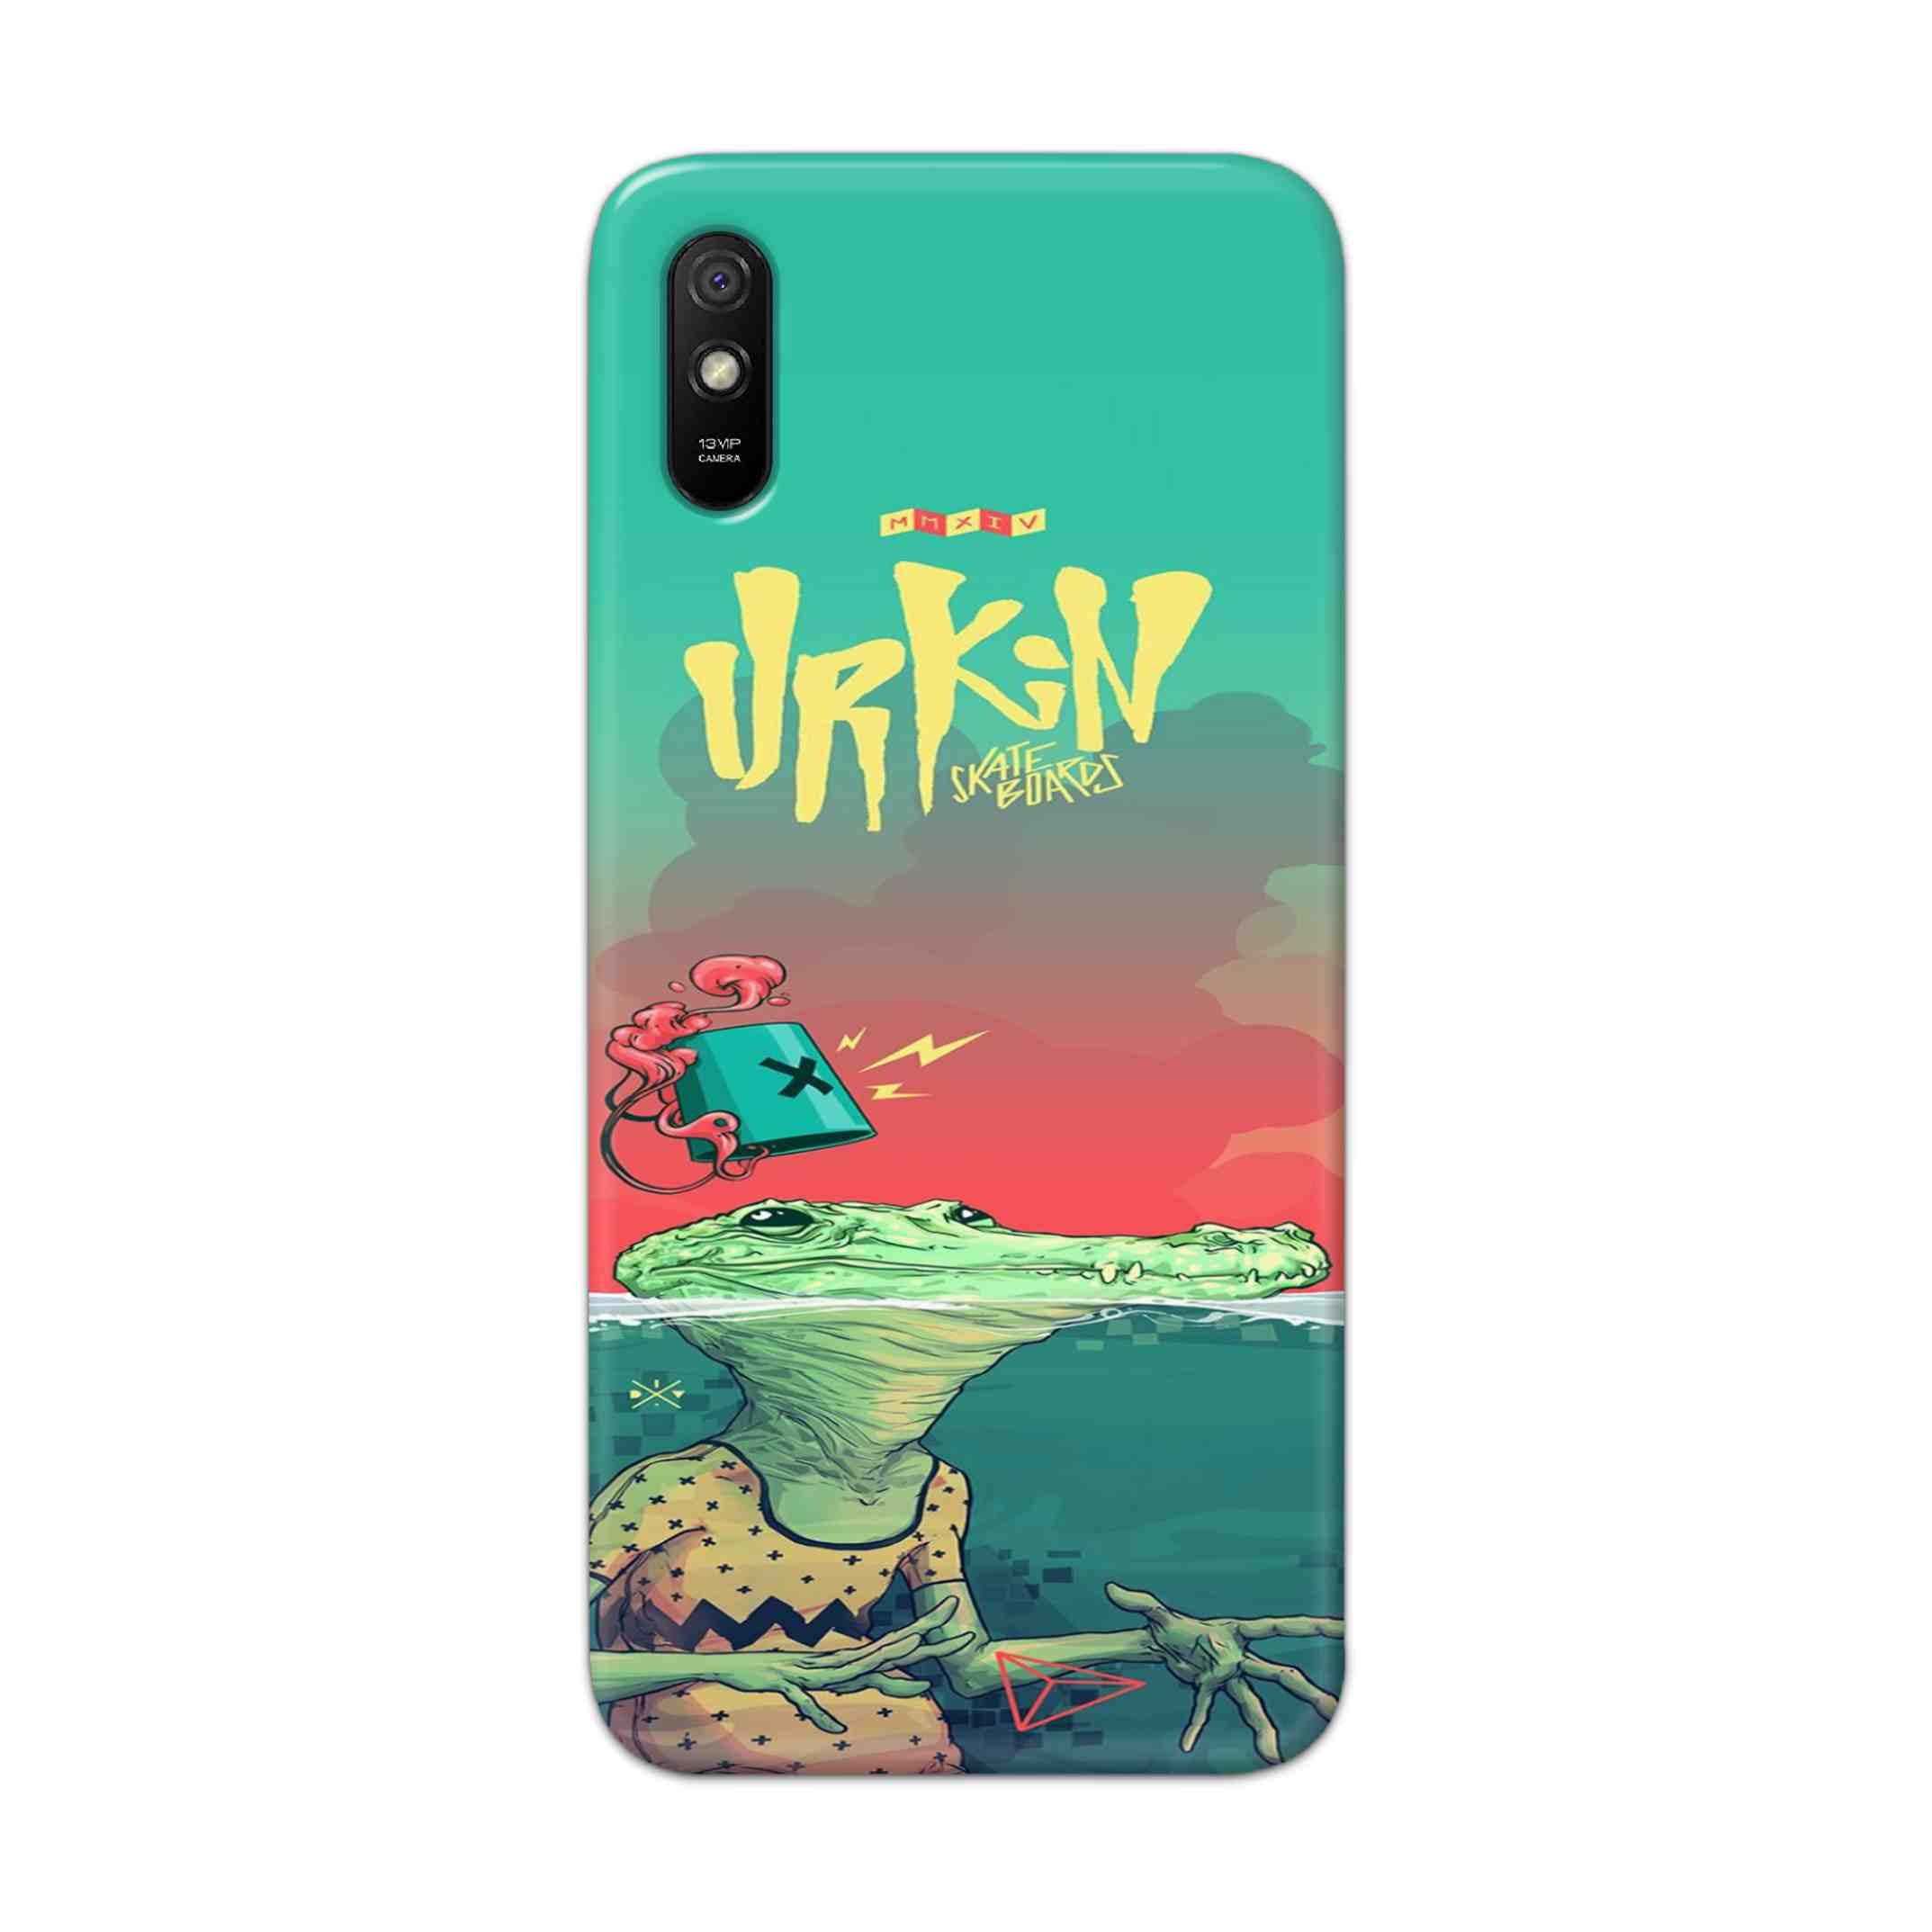 Buy Urkin Hard Back Mobile Phone Case Cover For Redmi 9A Online